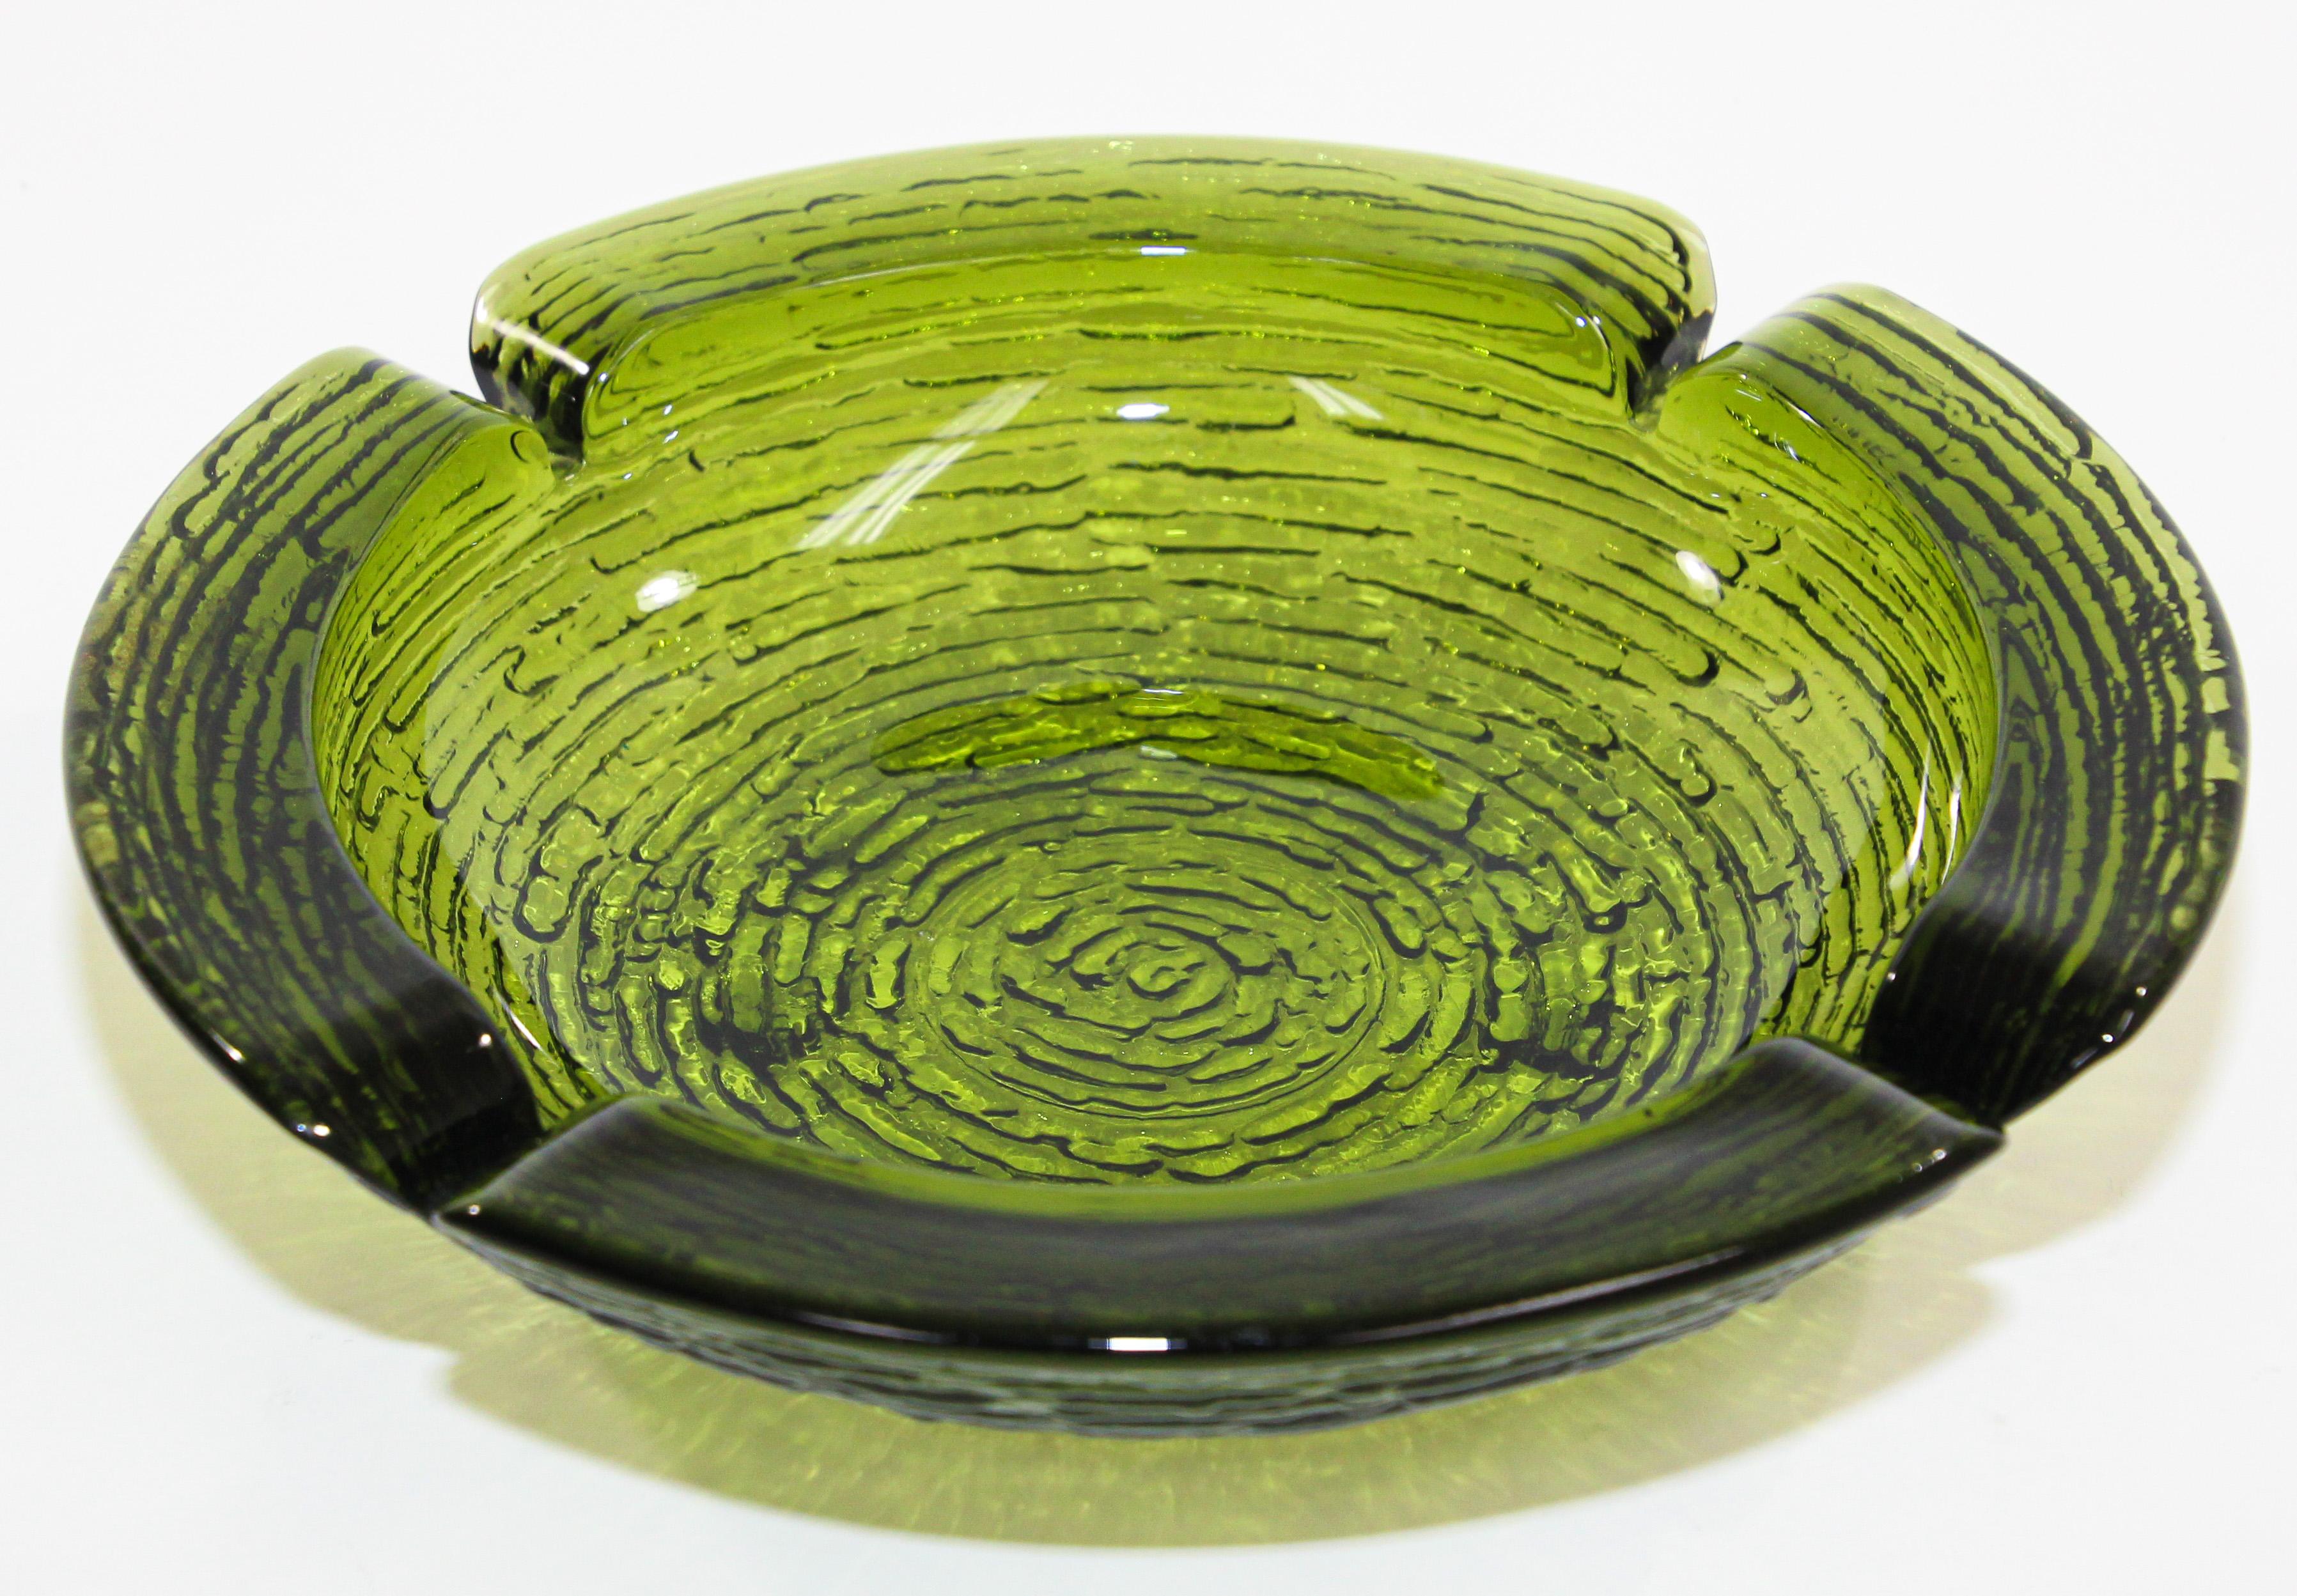 Large vintage Mid-Century Modern emerald green Blenko glass ashtray from the 1950s.
Fabulous Blenko Art Glass ashtray in green with textured bottom. 
This beautiful, green ashtray is a great example of Mid Century Modern Retro style, color, and